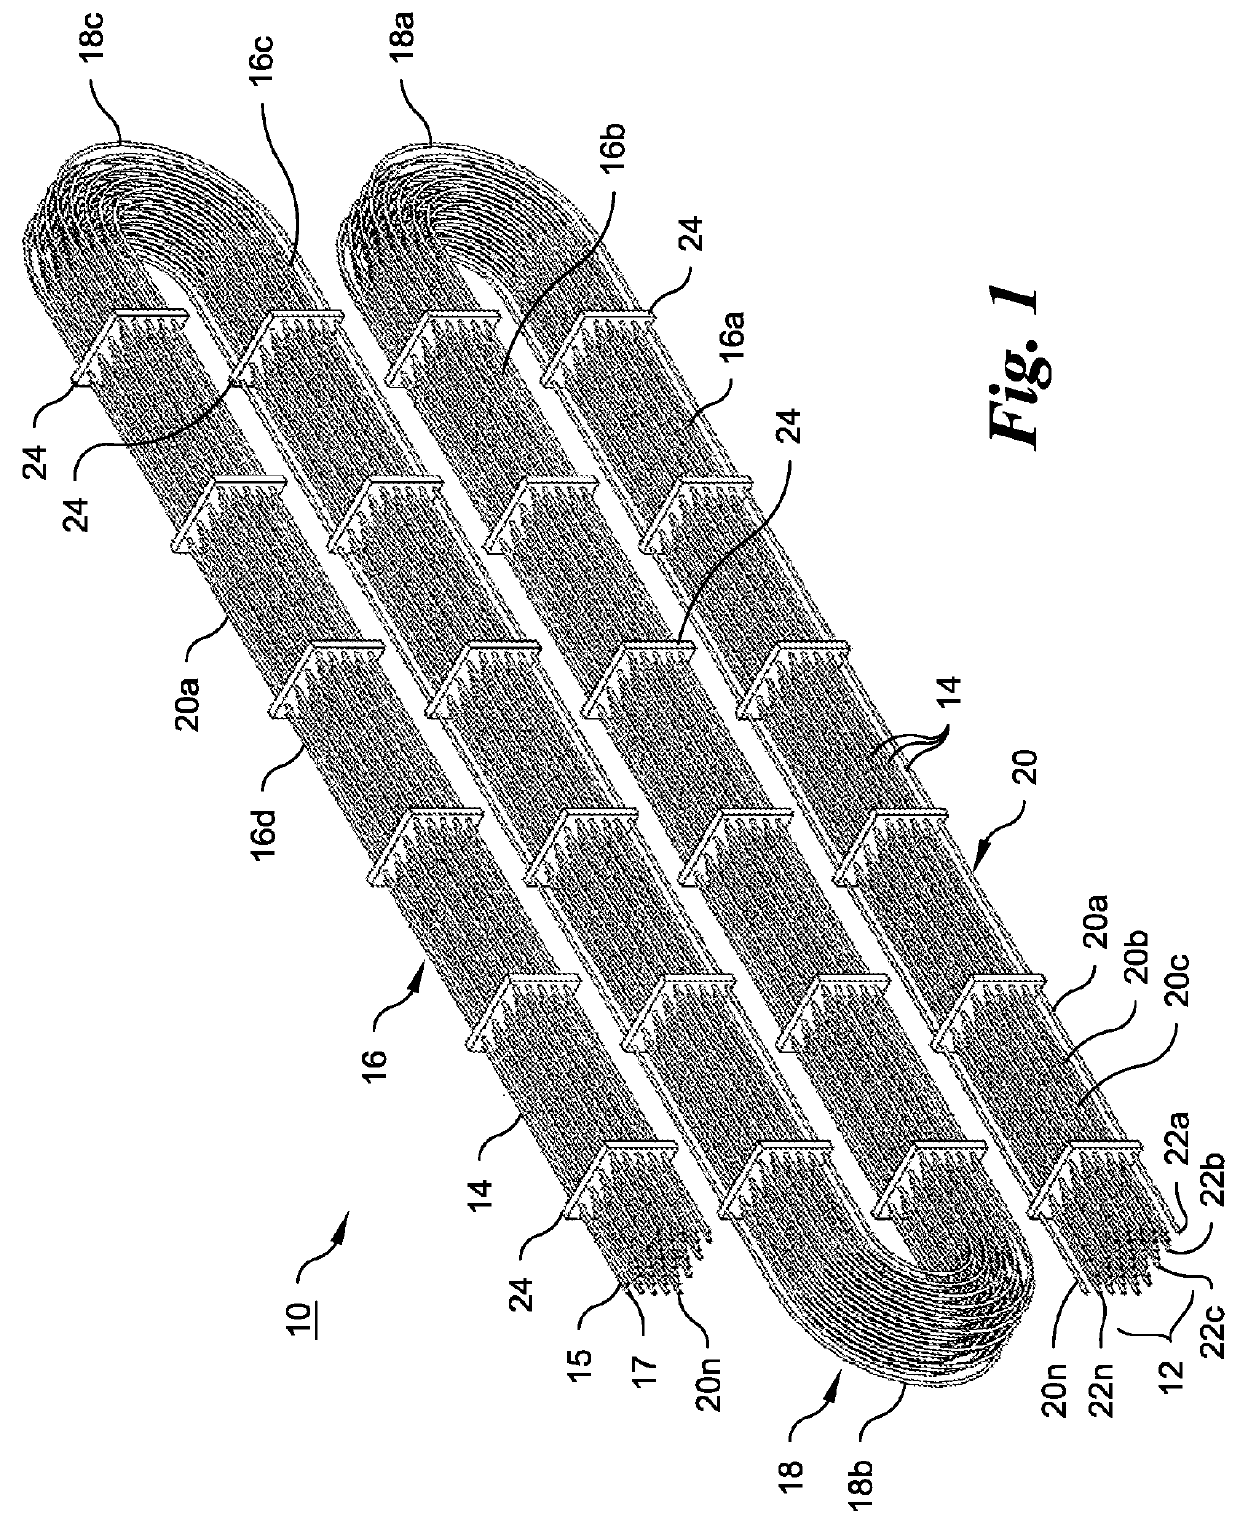 Polymeric coil assembly and method of making the same